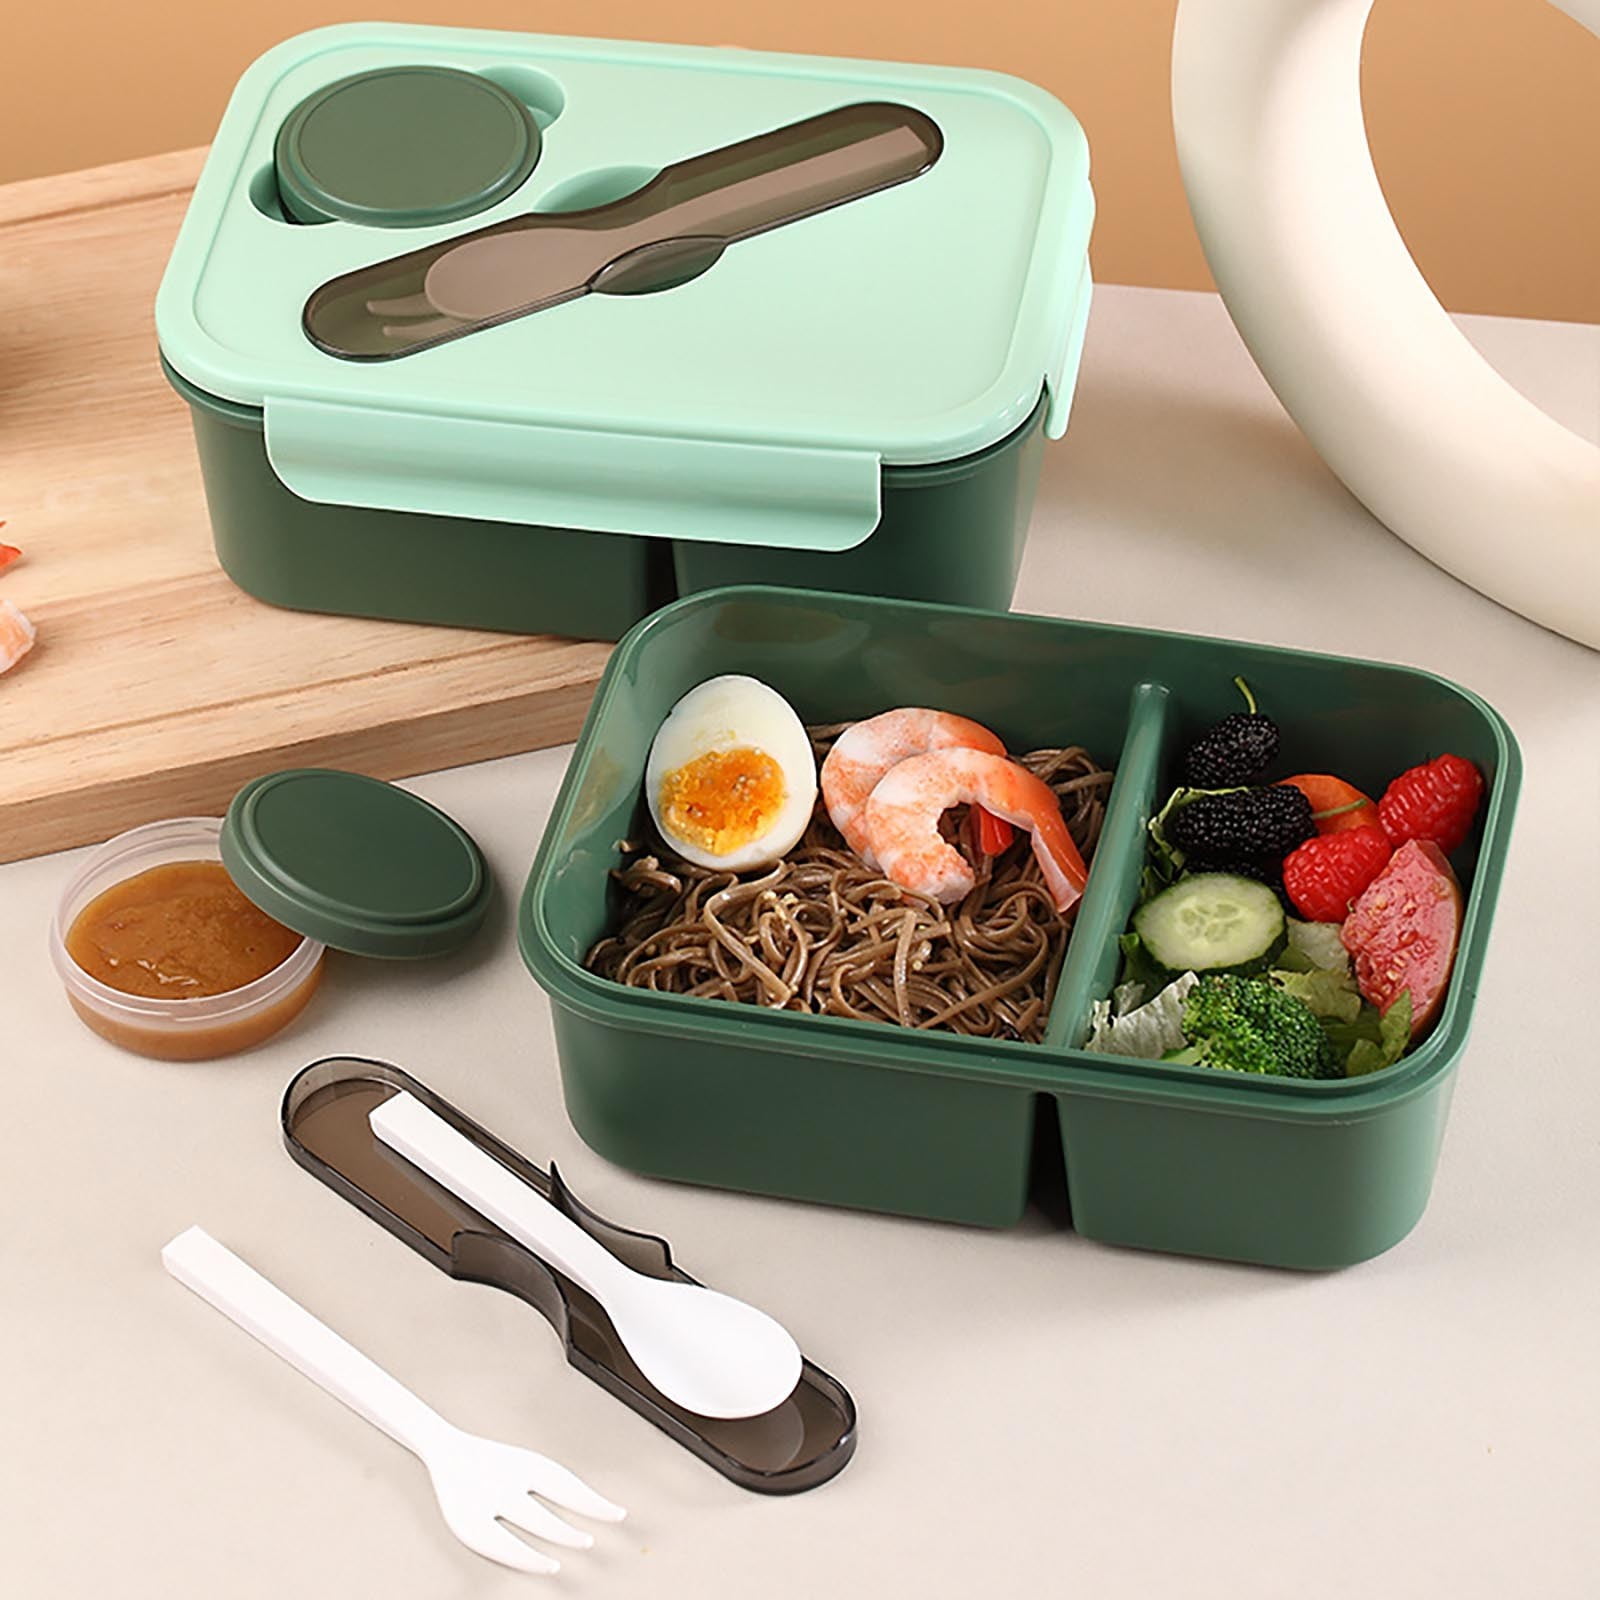 Local shipped】Zskiller Microwave Oven Lunch Box For kids/Adult